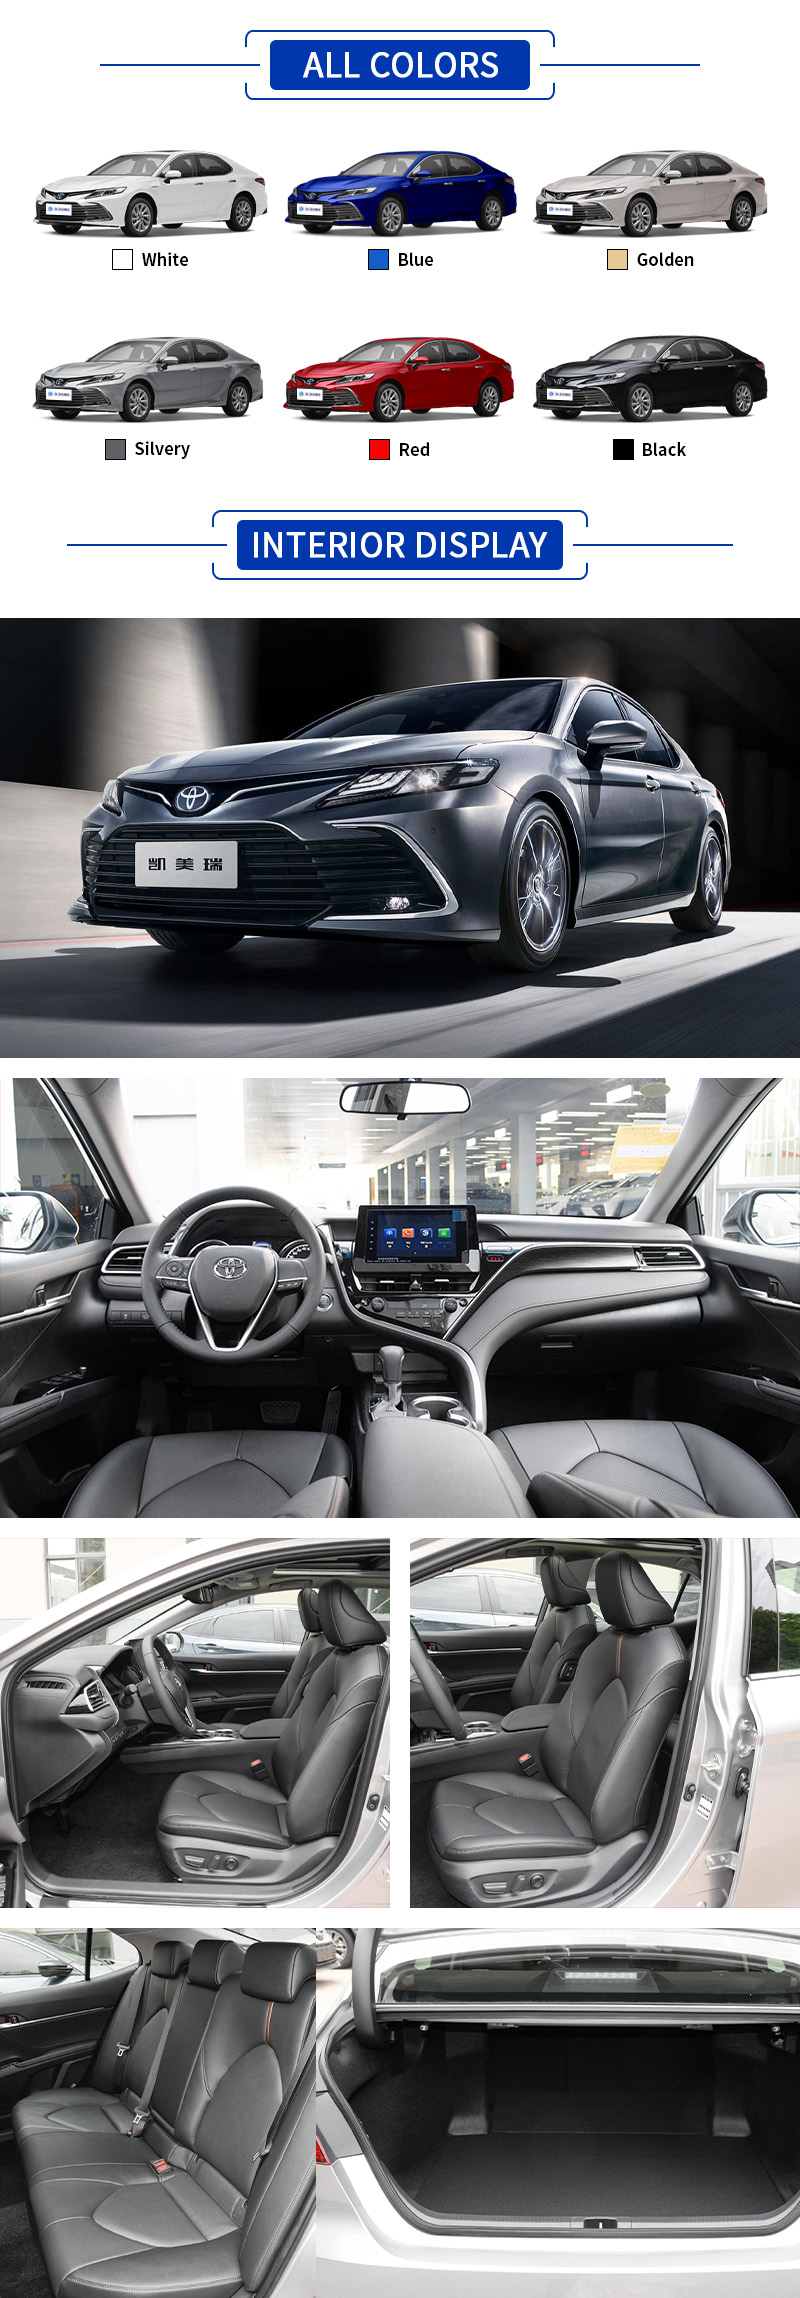 Toyota Camry ALL COLORS and INTERIOR DISPLAY